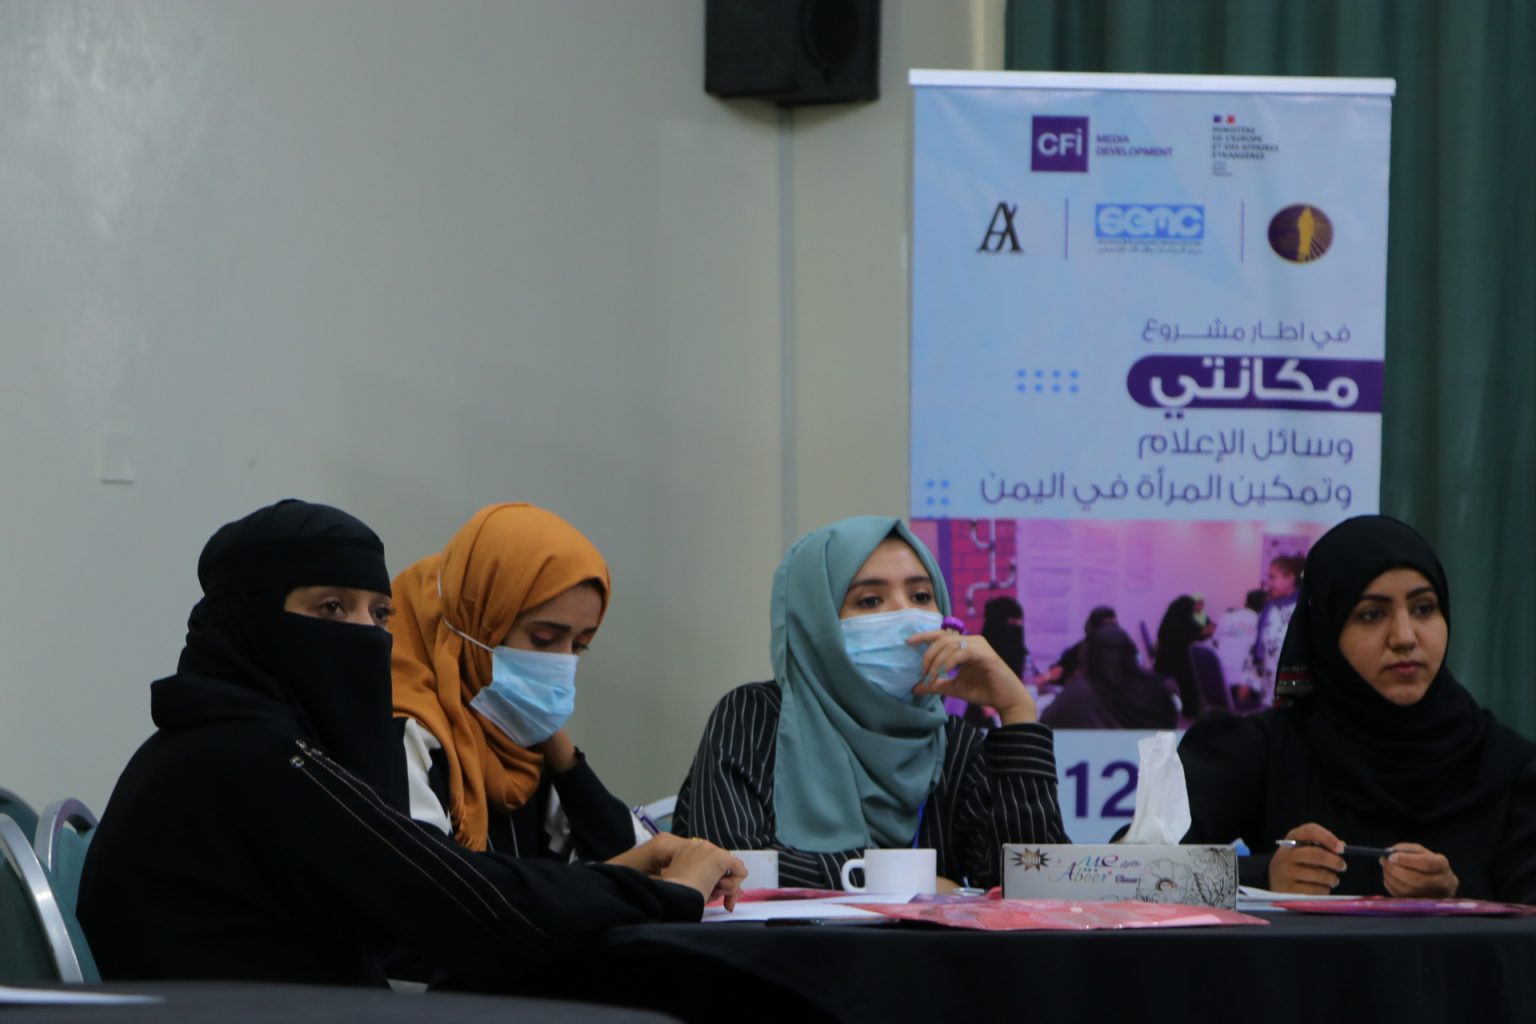 “Conclusion of the journalistic capacity-building program for the empowerment of women in the management of media organizations”